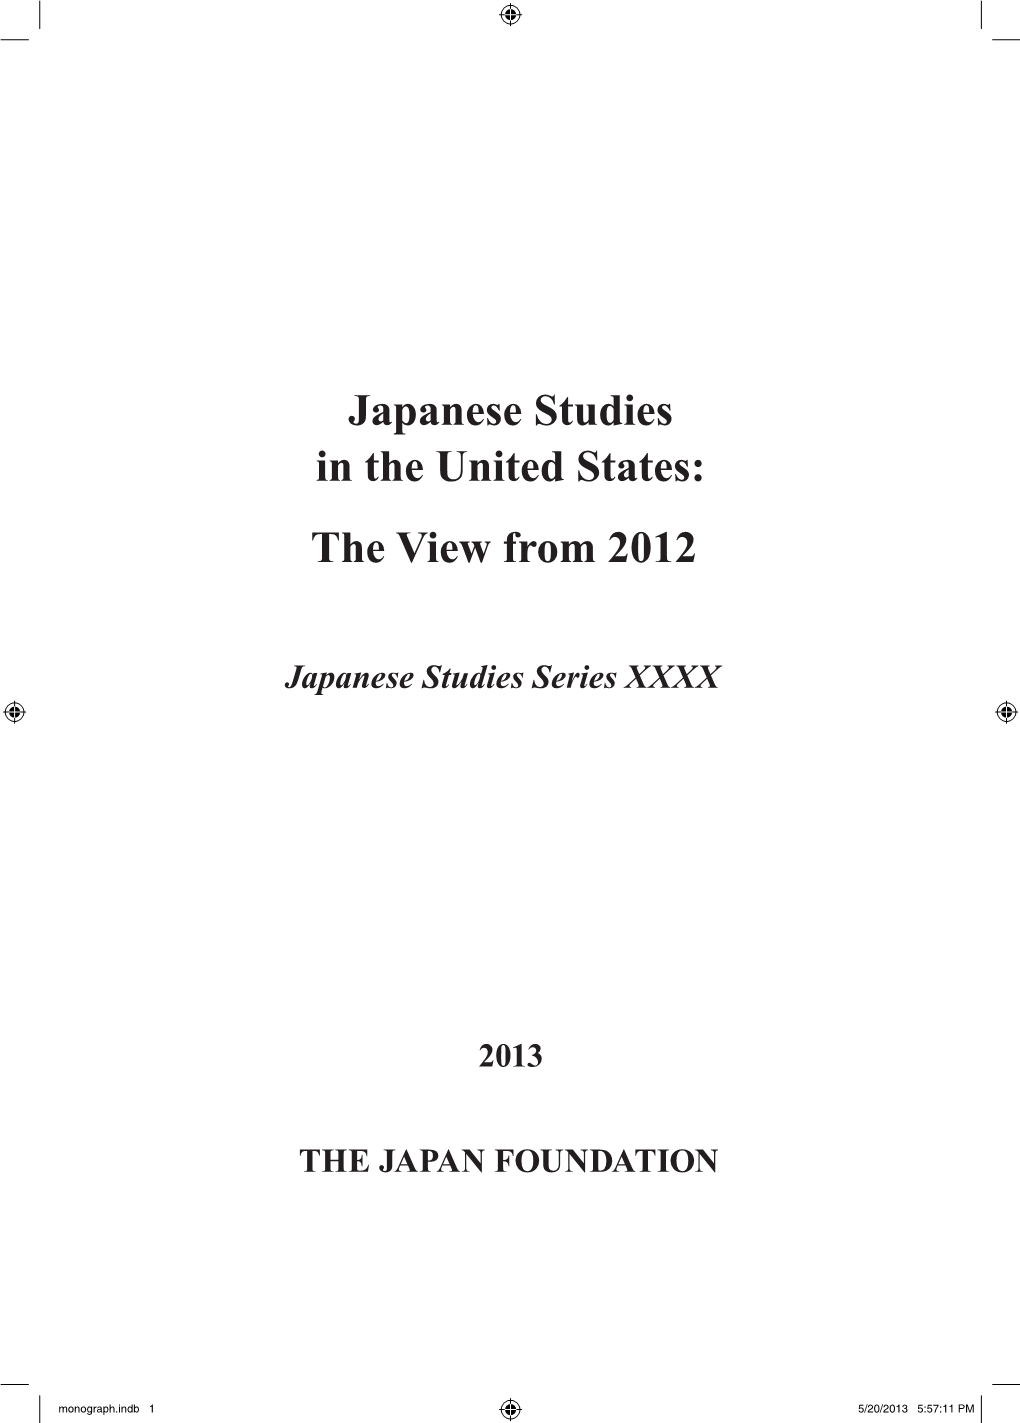 Japanese Studies in the United States: the View from 2012